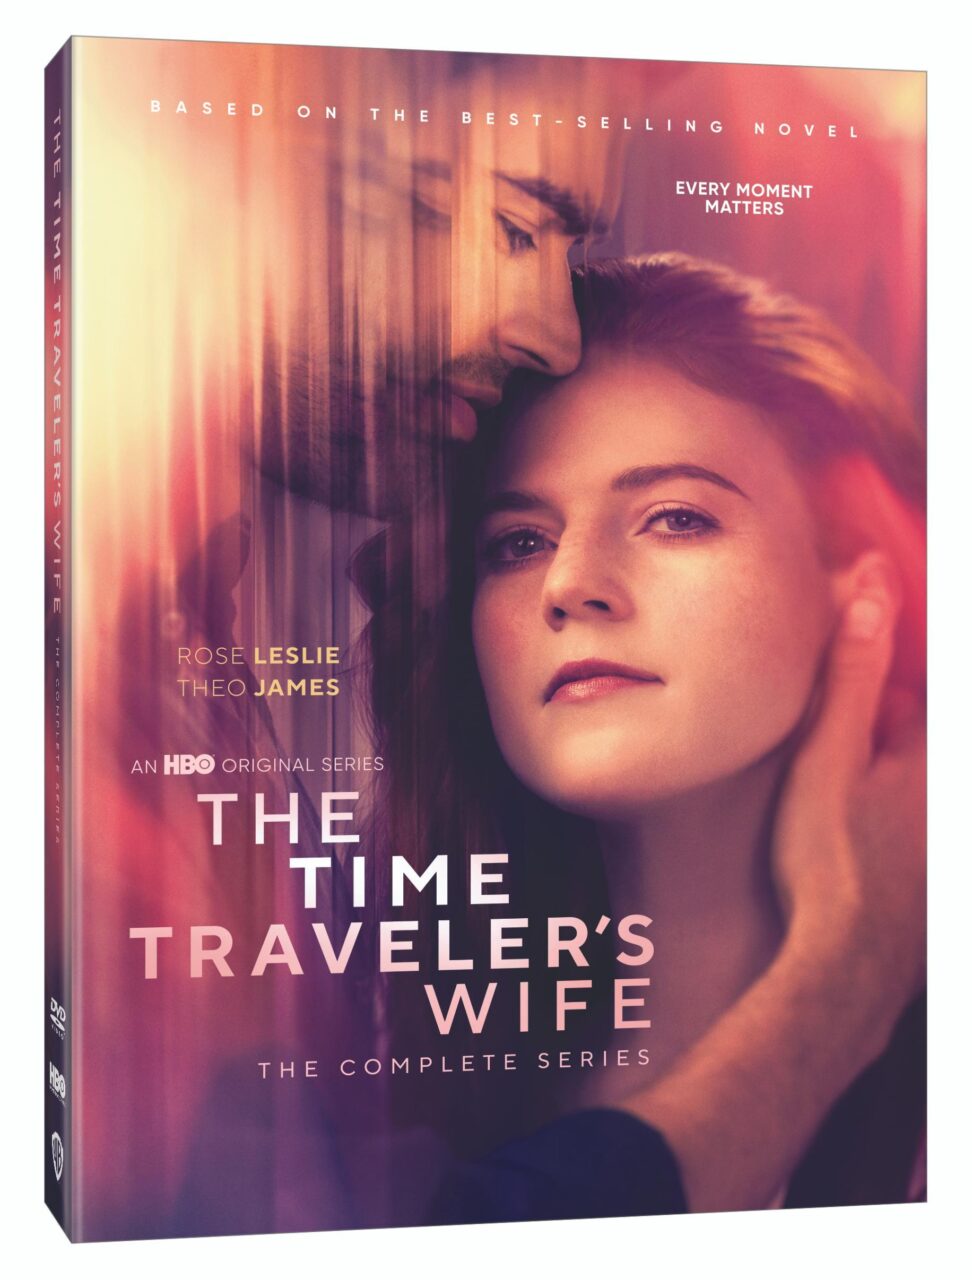 The Time Traveler's Wife: The Complete Series DVD cover (Warner Bros. Home Entertainment)